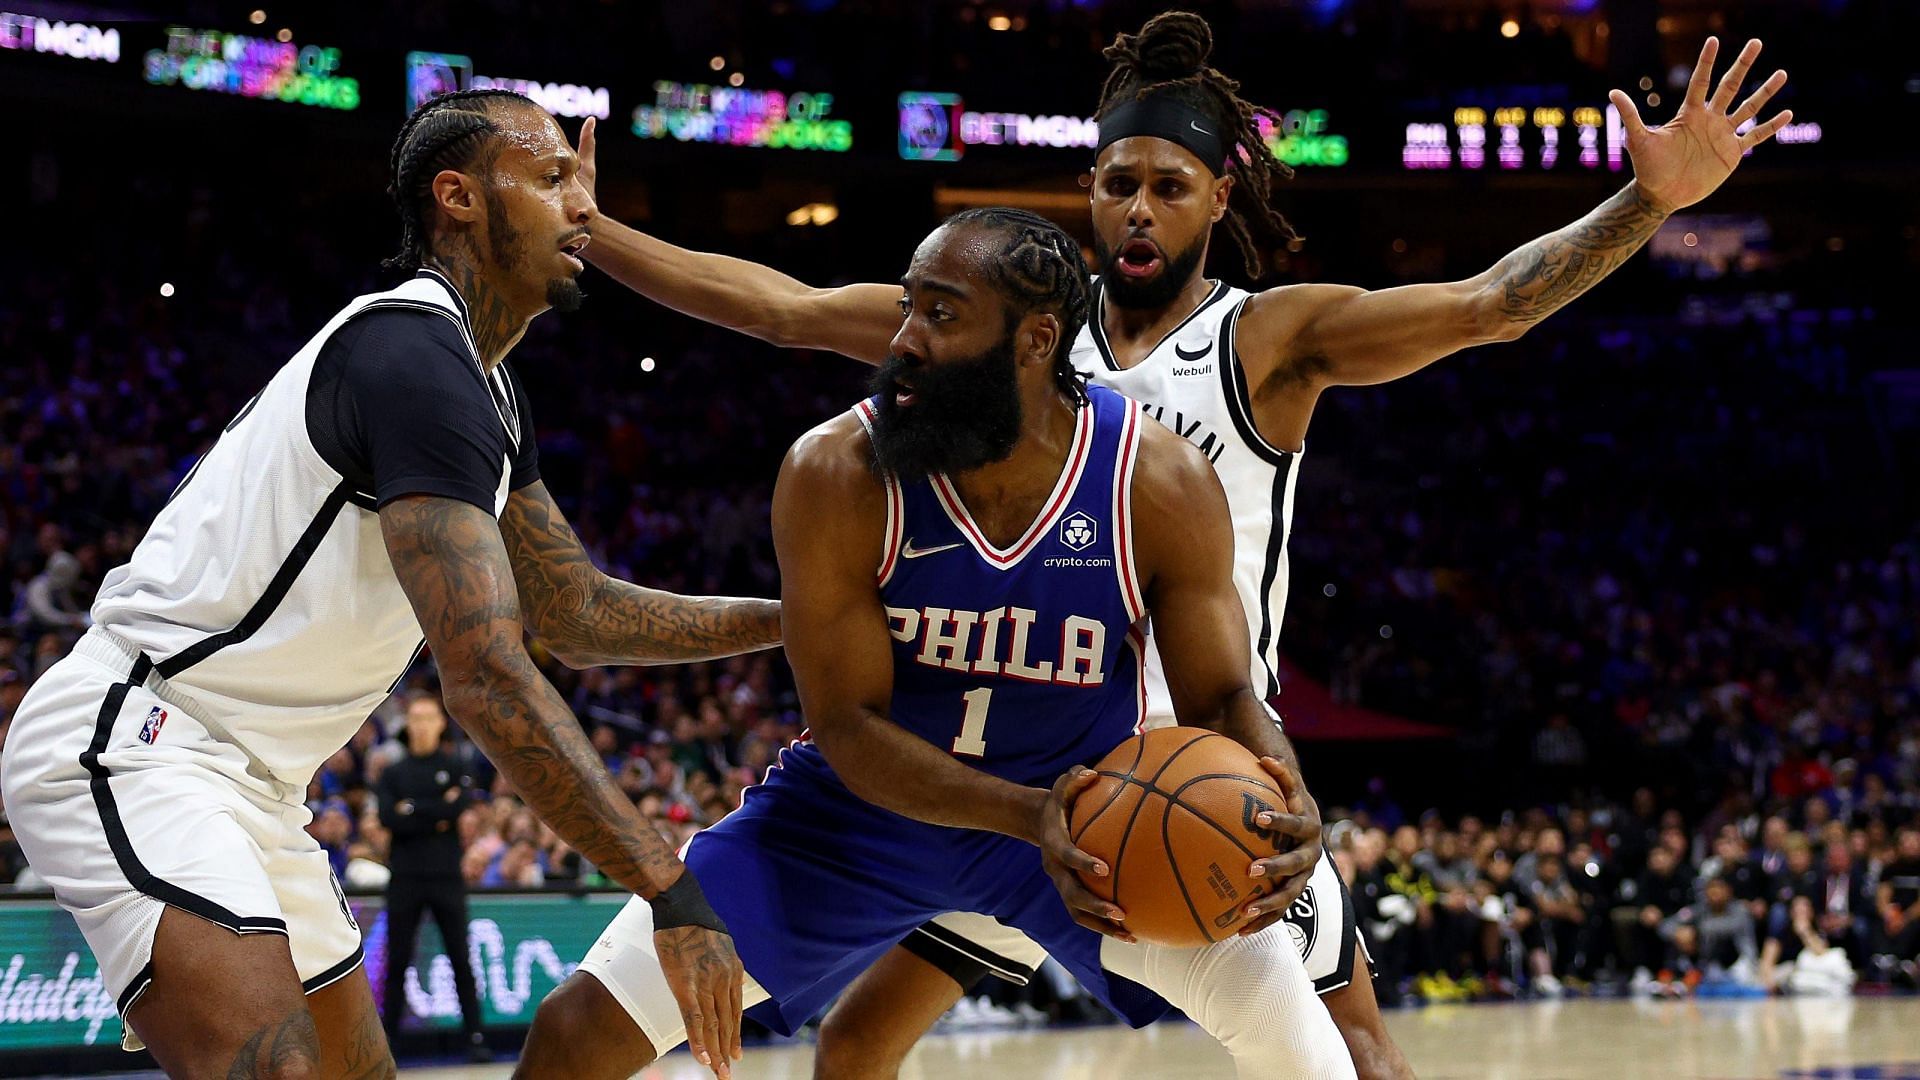 James Harden had another disappointing performance in a much-anticipated game between two heated rivals. [Photo: USA Today]